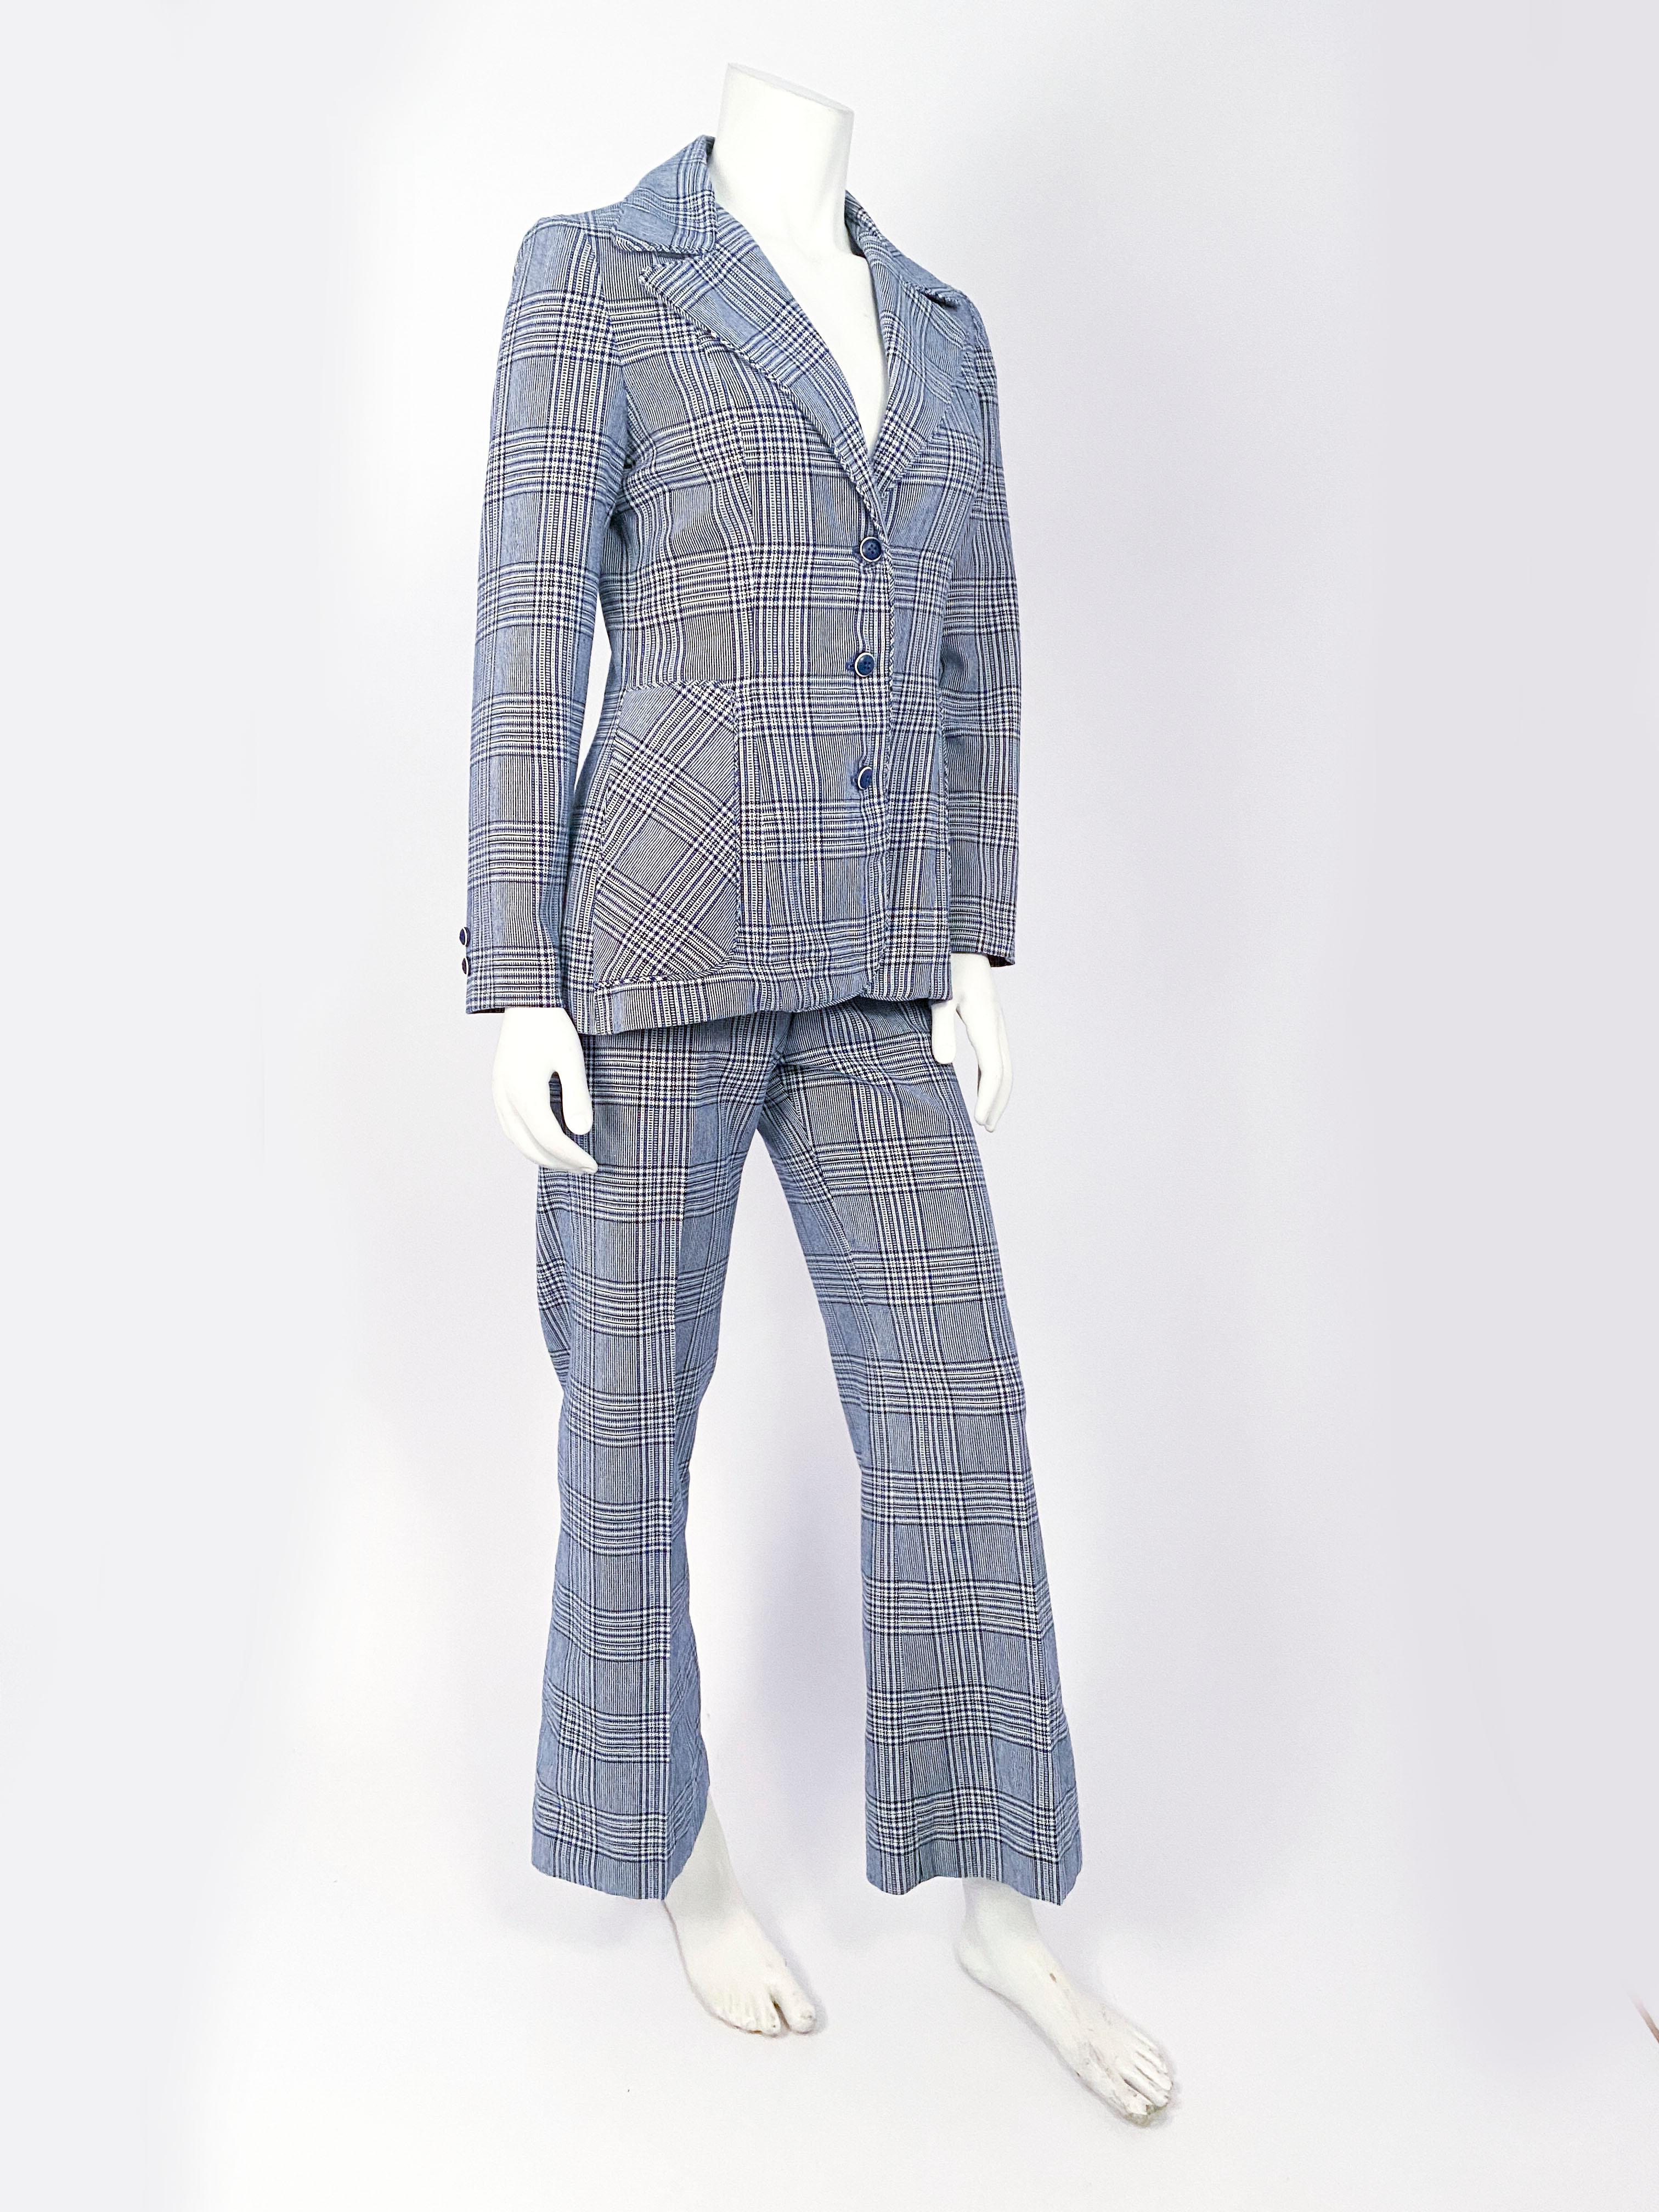 Gray 1970s Navy and White Plaid Mod Pant Suit